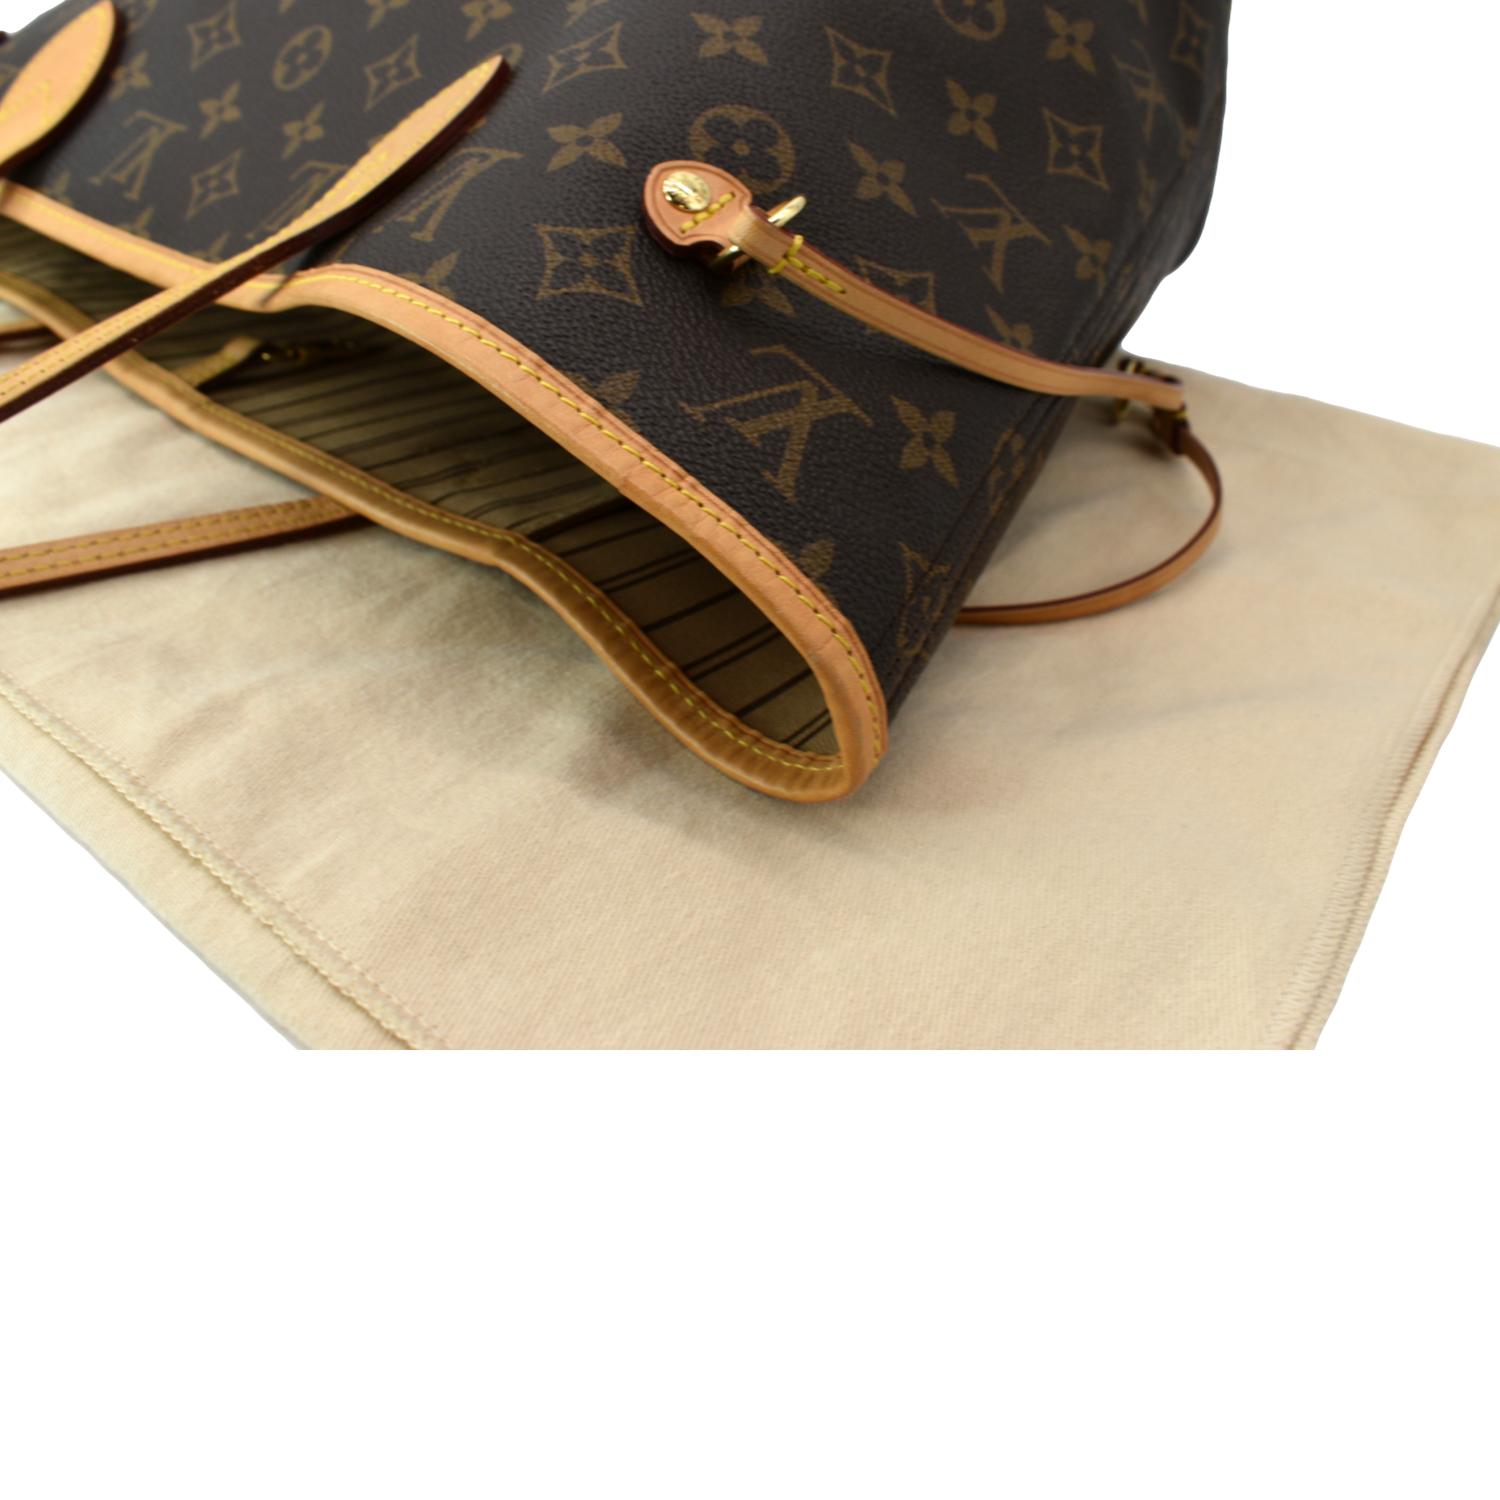 SOLD) 💜💜💜. LV Neverfull Pochette in Monogram w/Beige lining Brand New DM  for pricing We Get The Good Stuff!